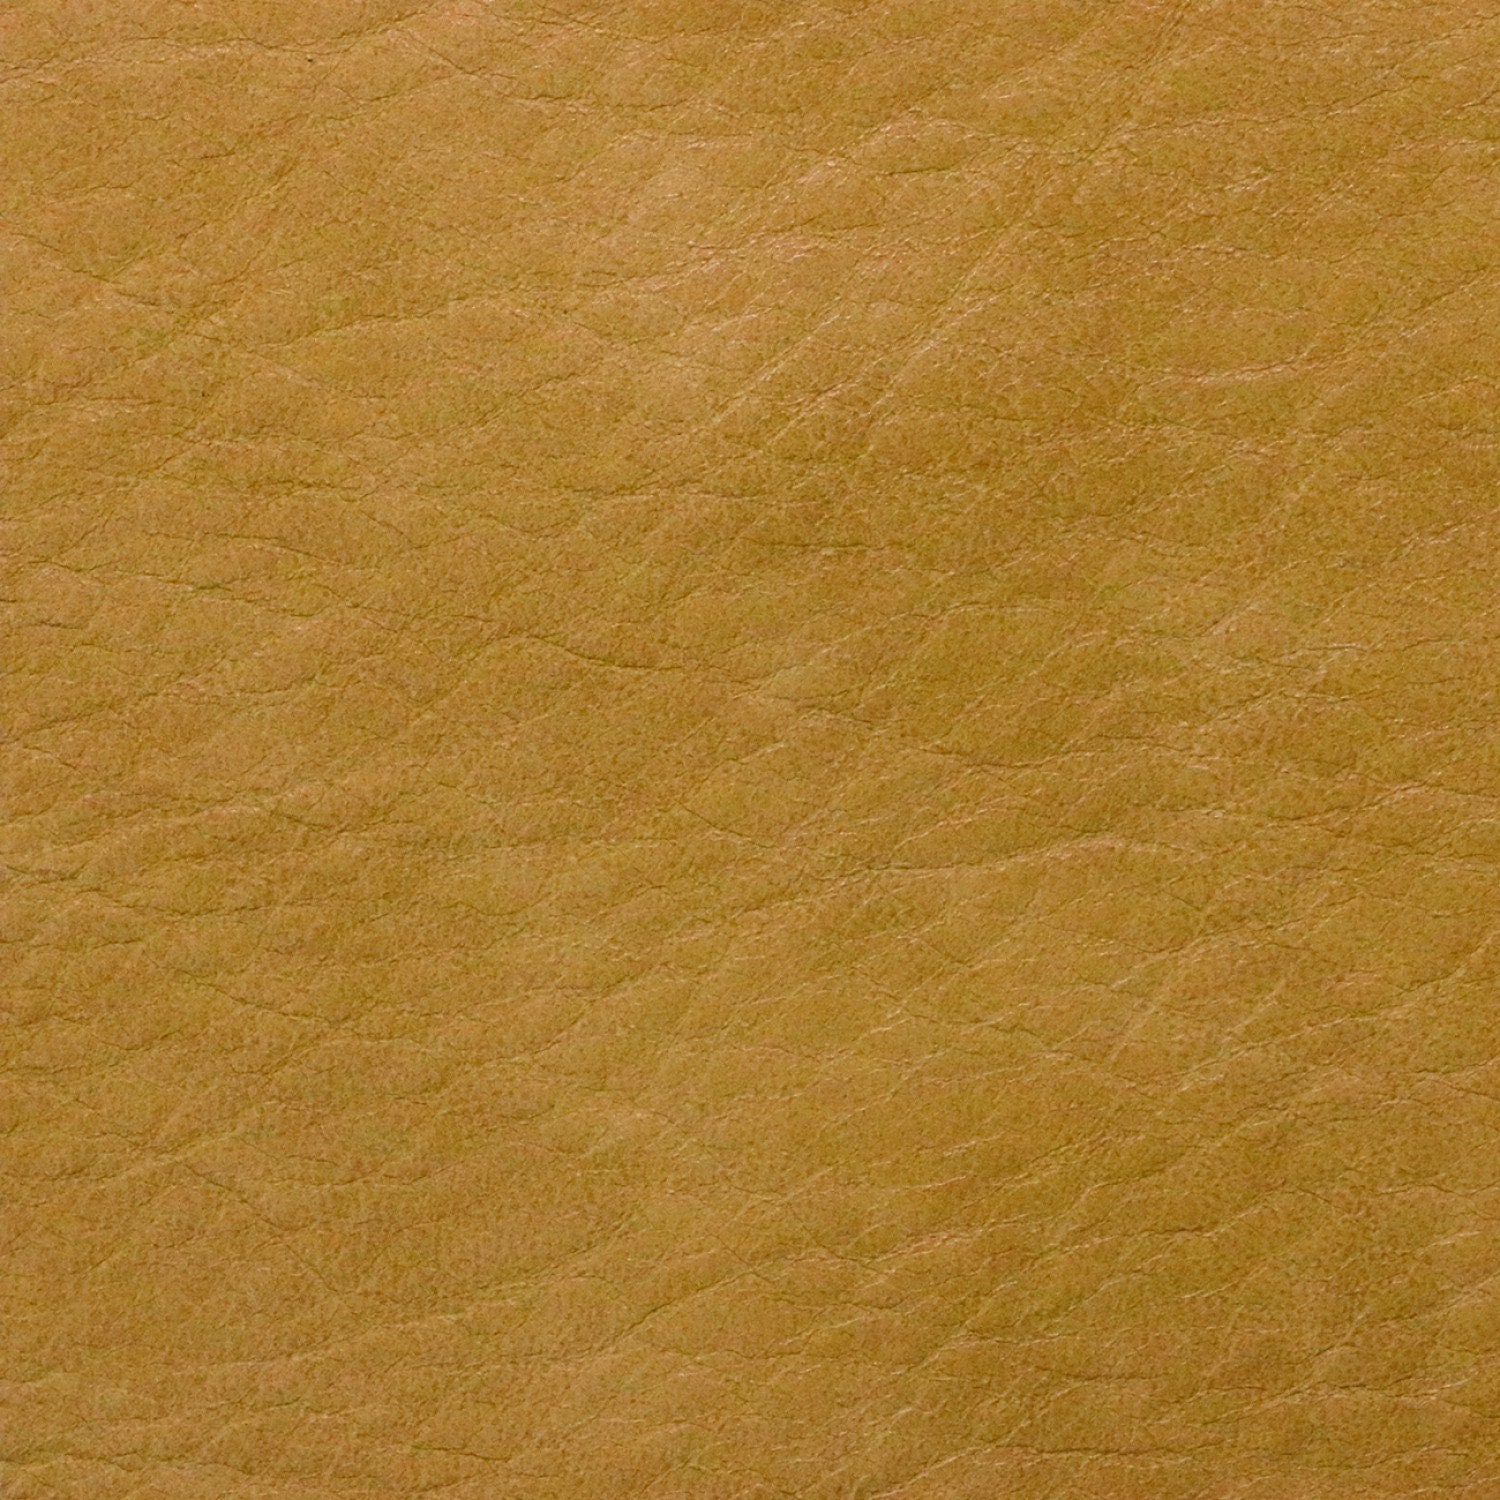 Crazy Horse Leather, Faux Leather Fabric, Fake Leather Fabric, Artificial  Leather, Sewing Leather, Craft Supply, DIY, by the Yard 